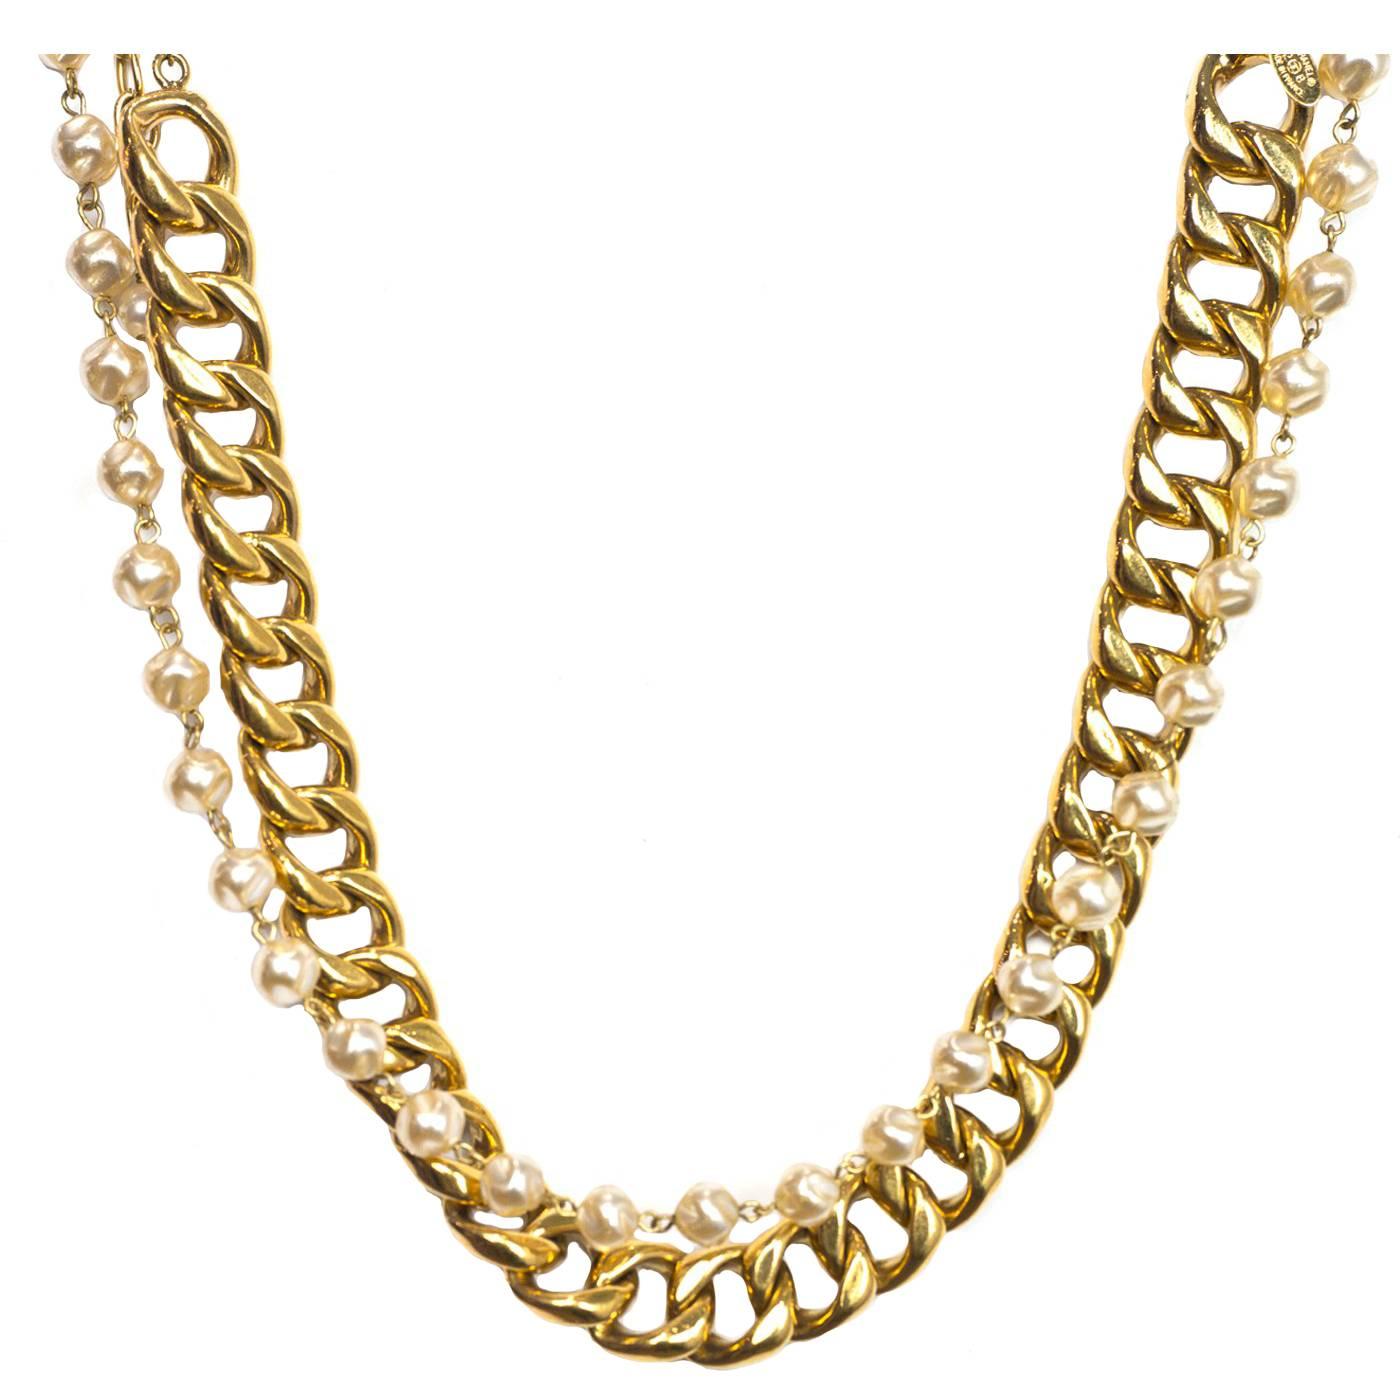 Chanel Vintage '88 Gold Chain Link & Small Pearl Choker Necklace